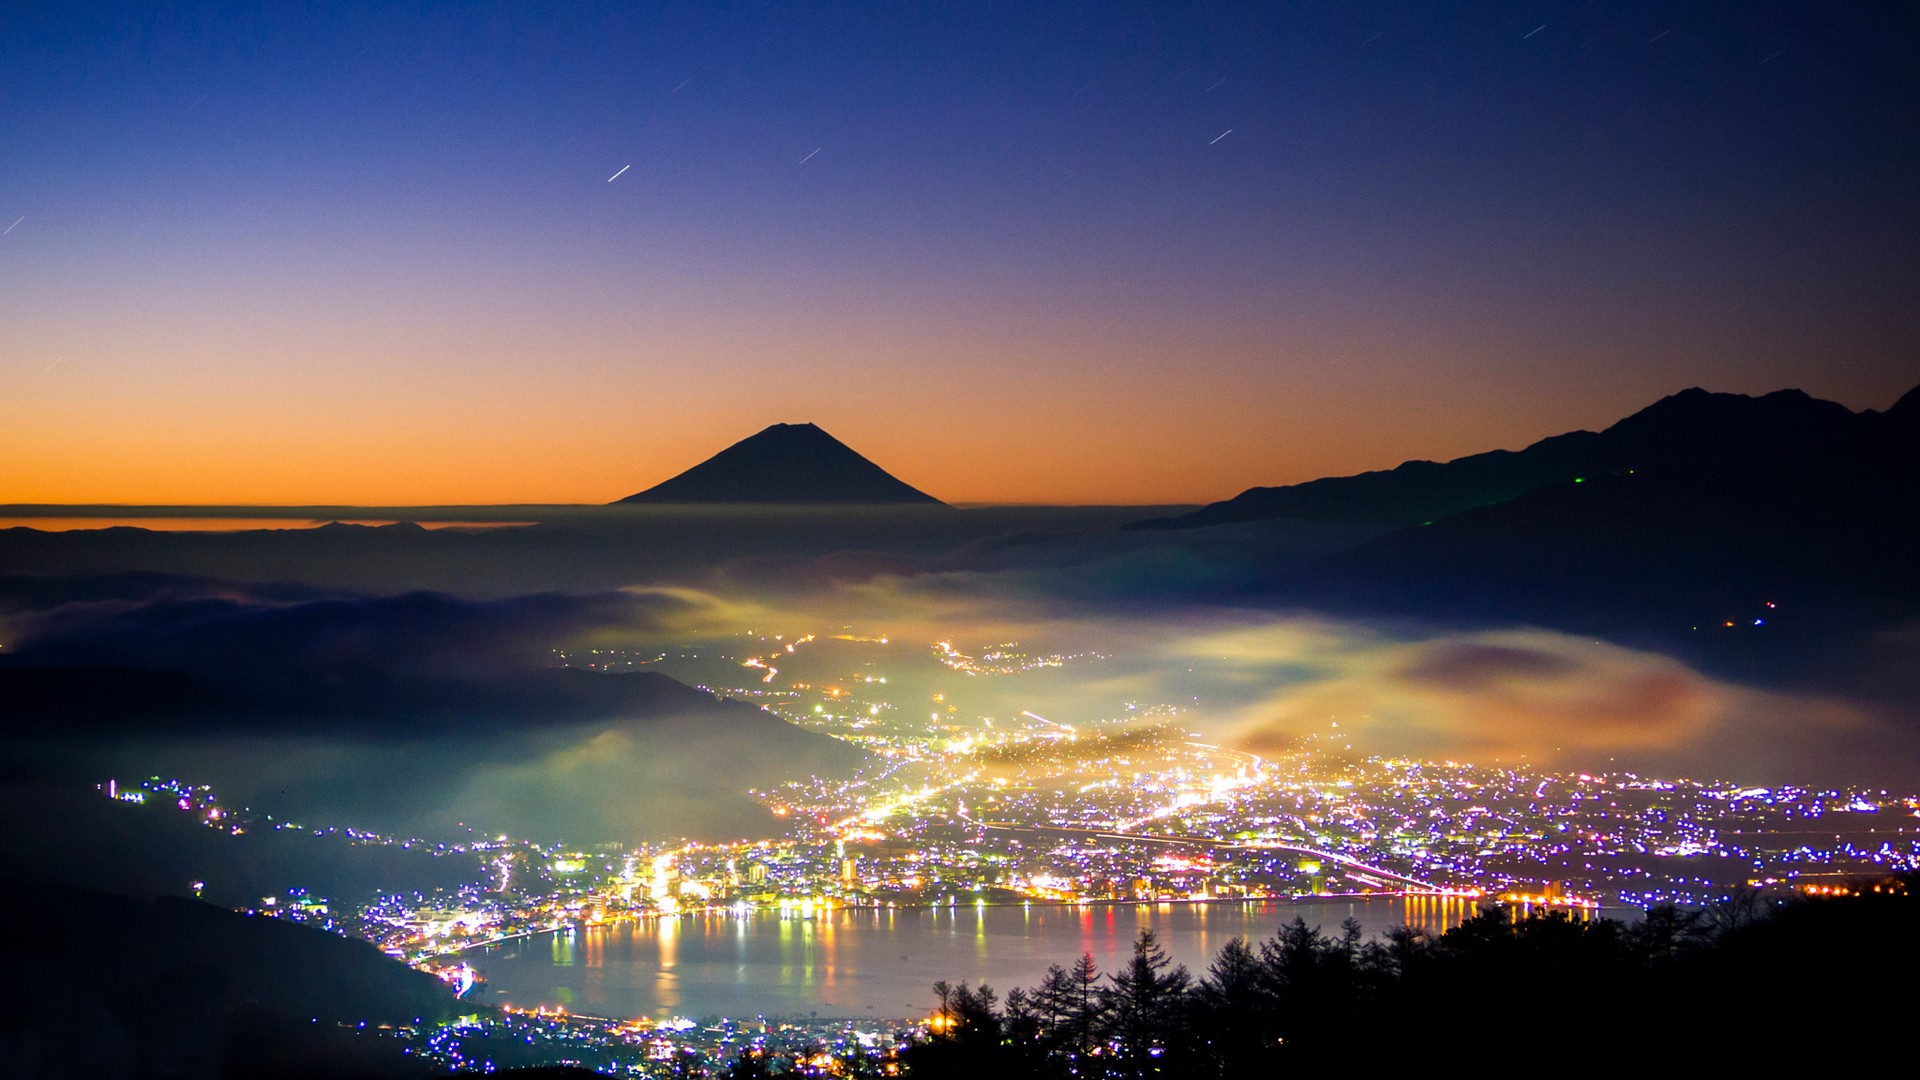 General 1920x1080 nature landscape mountains Mount Fuji Japan evening hills trees mist long exposure city lake sunset lights stars silhouette forest Asia